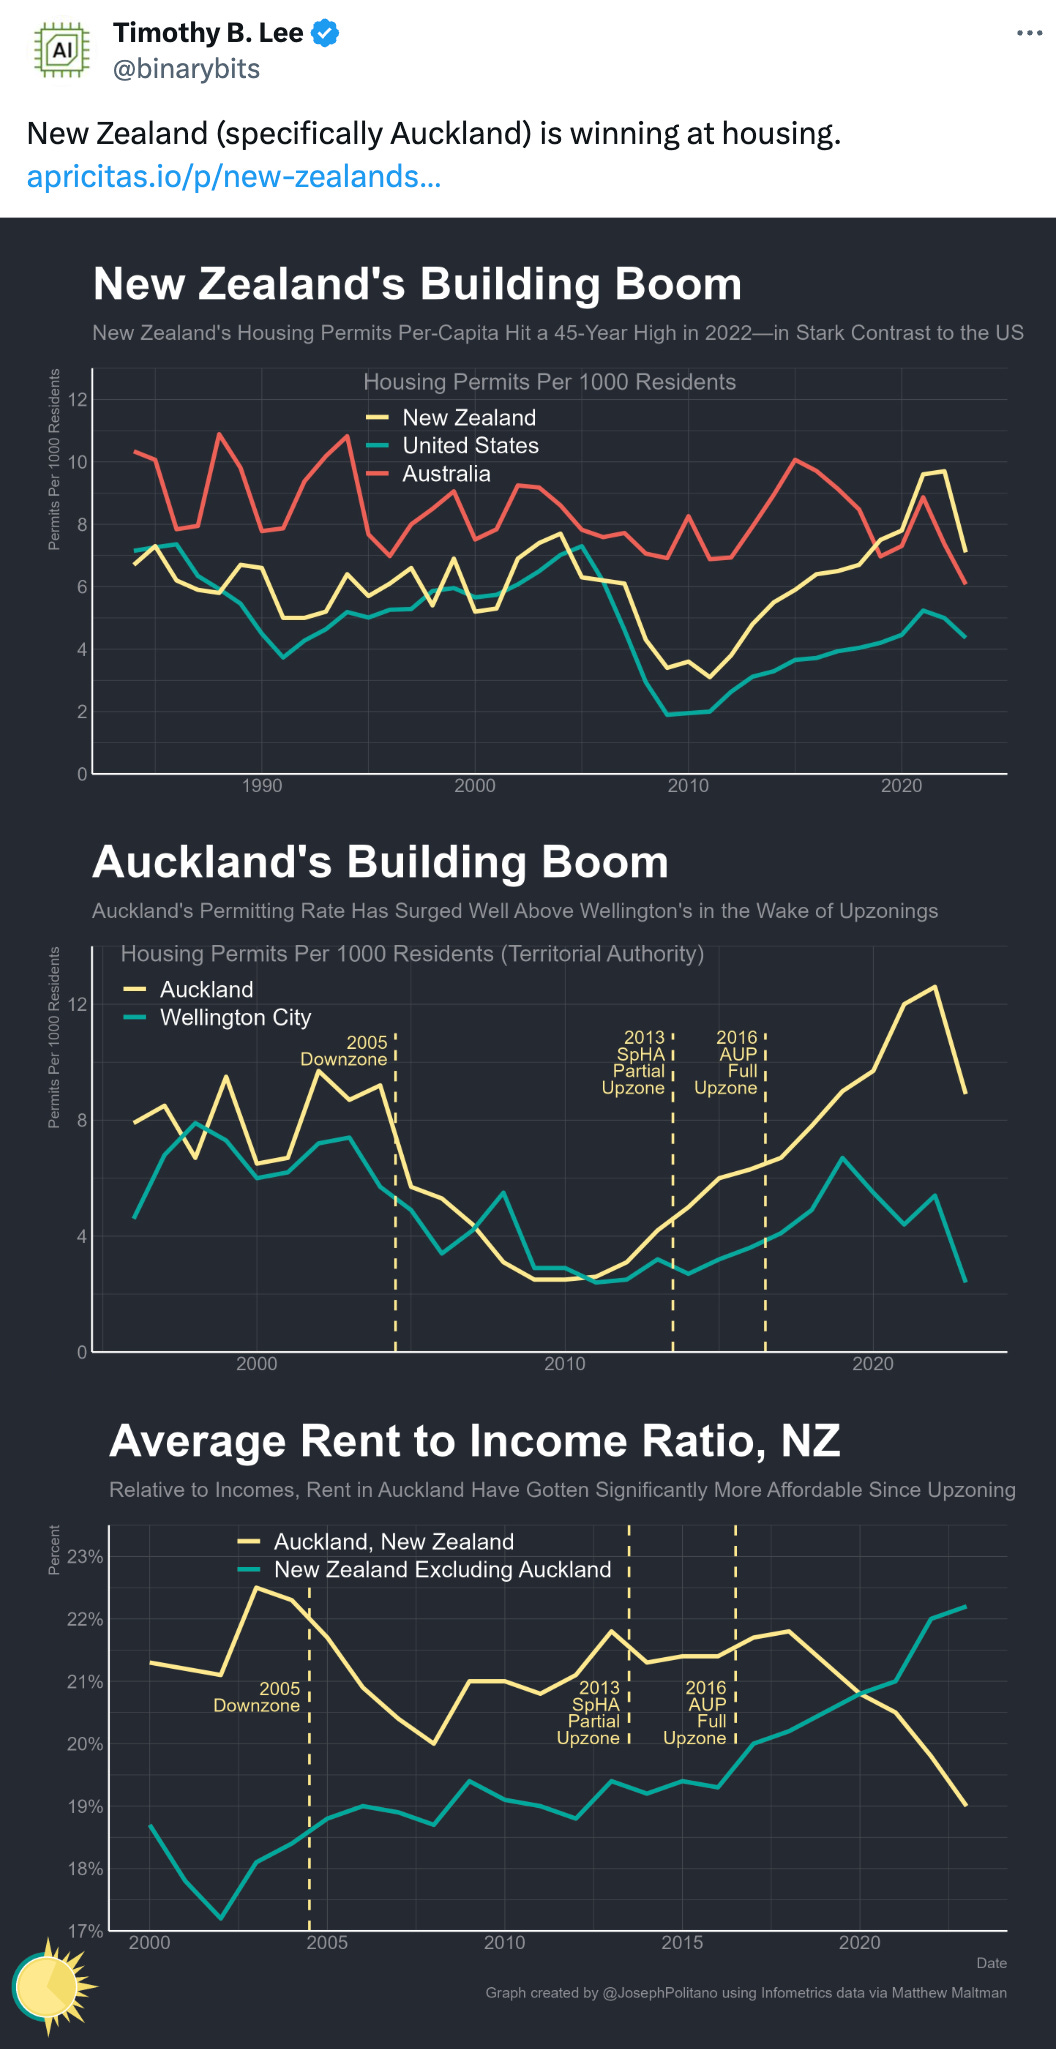  See new posts Conversation Timothy B. Lee @binarybits New Zealand (specifically Auckland) is winning at housing. https://apricitas.io/p/new-zealands-building-boomand-what